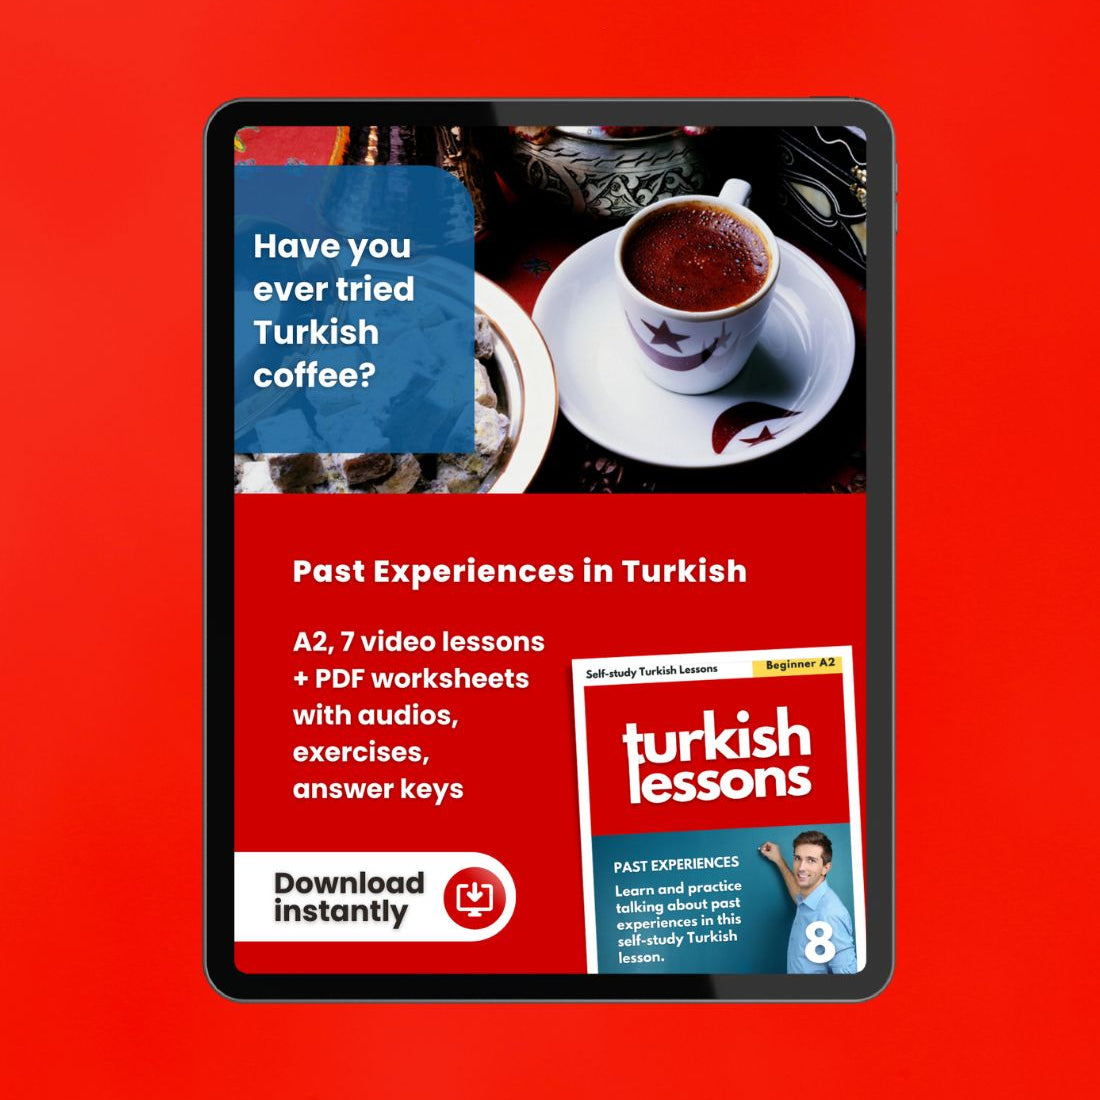 turkish lessons a2 - past experiences in turkish language